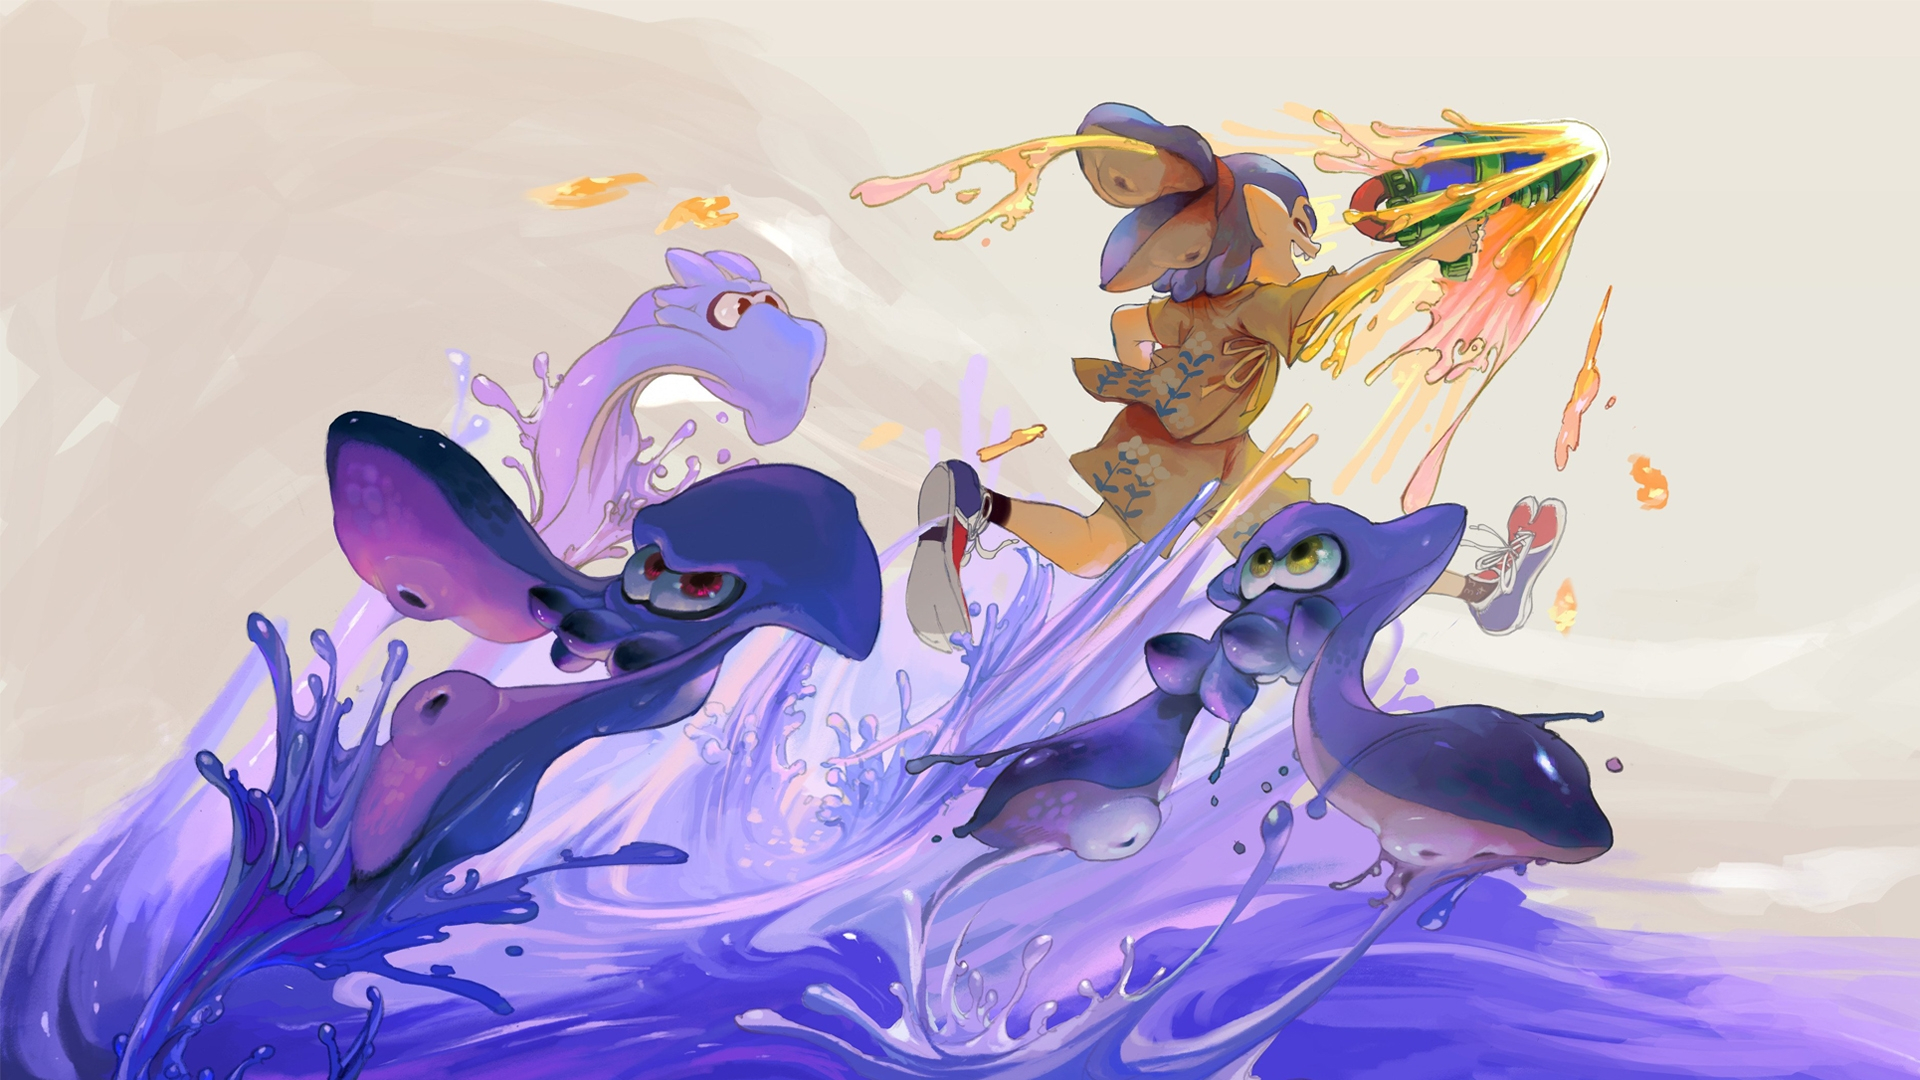 1920x1080 Download 2560x1440 Splatoon, Creatures, Running, Console Games Wallpapers for iMac 27 inch